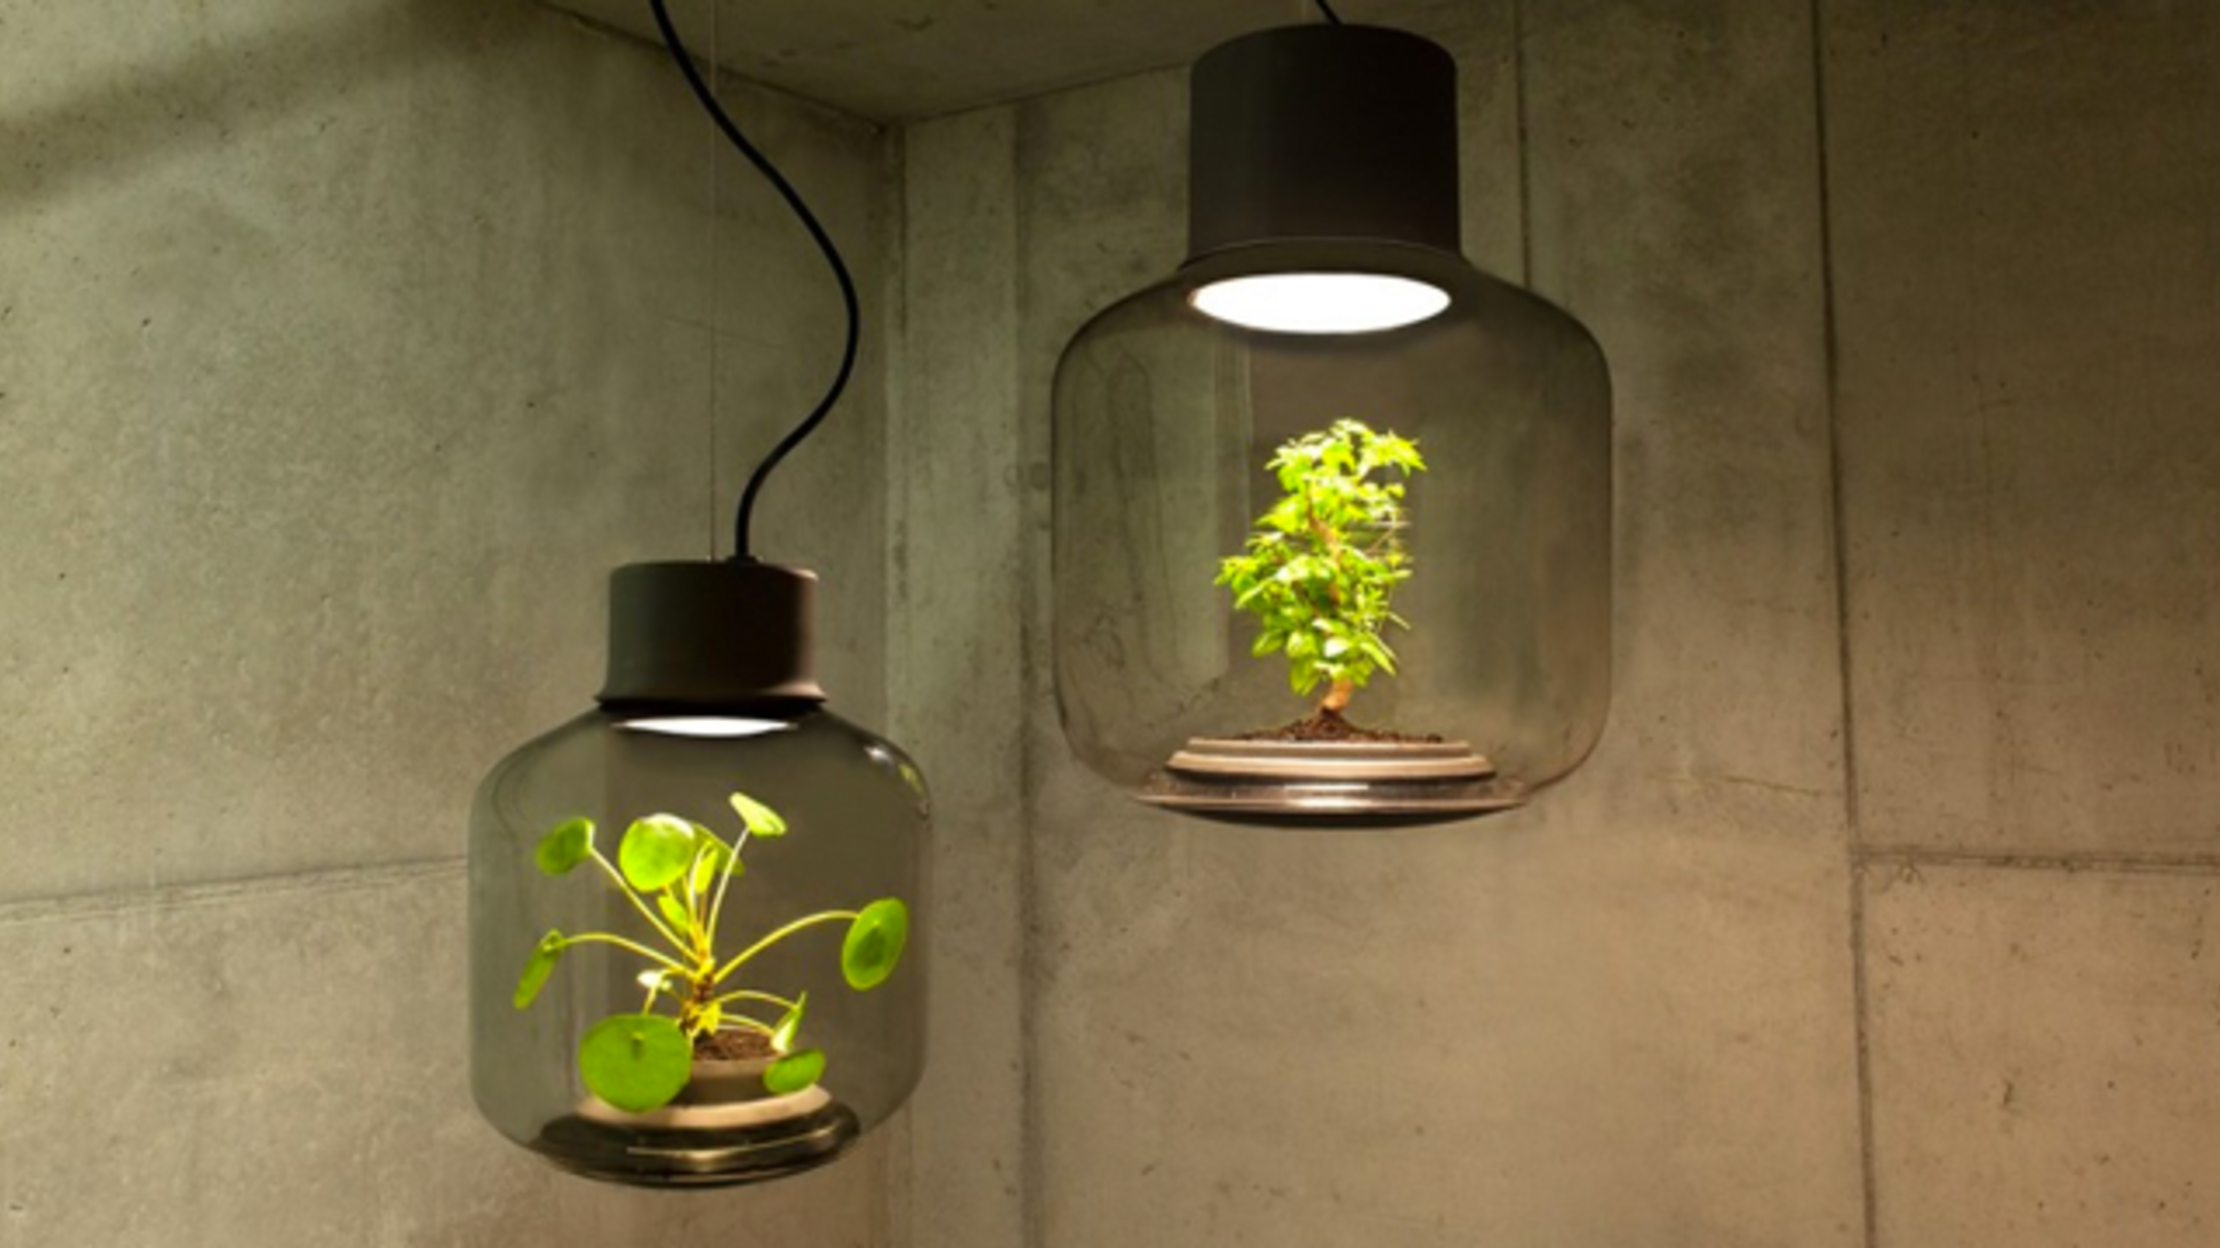 These Special Lamps Allow Plants to Grow Without Sunlight | Mental Floss